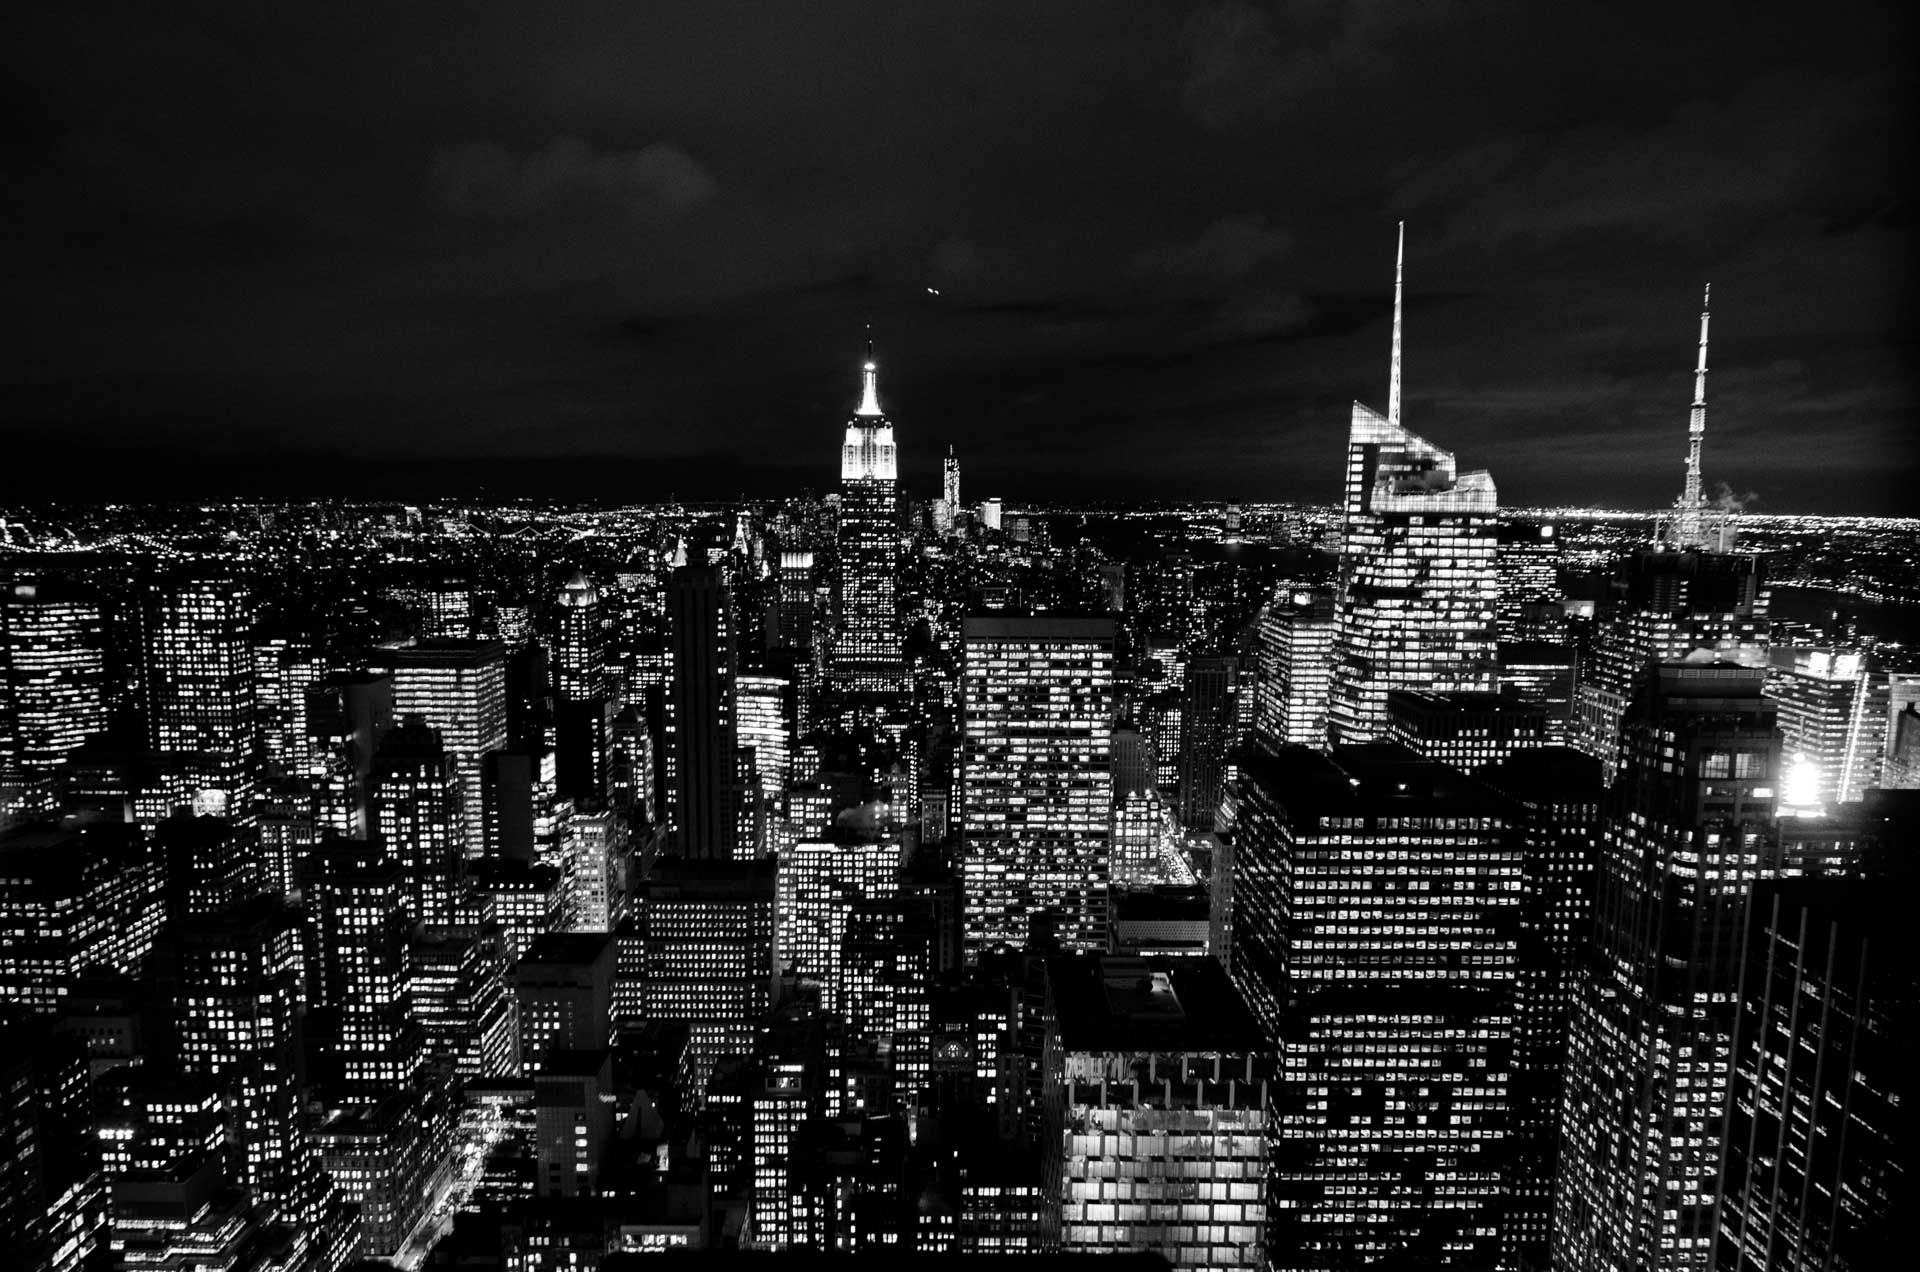 Black-and-white photo of skyscrapers in Manhattan at night